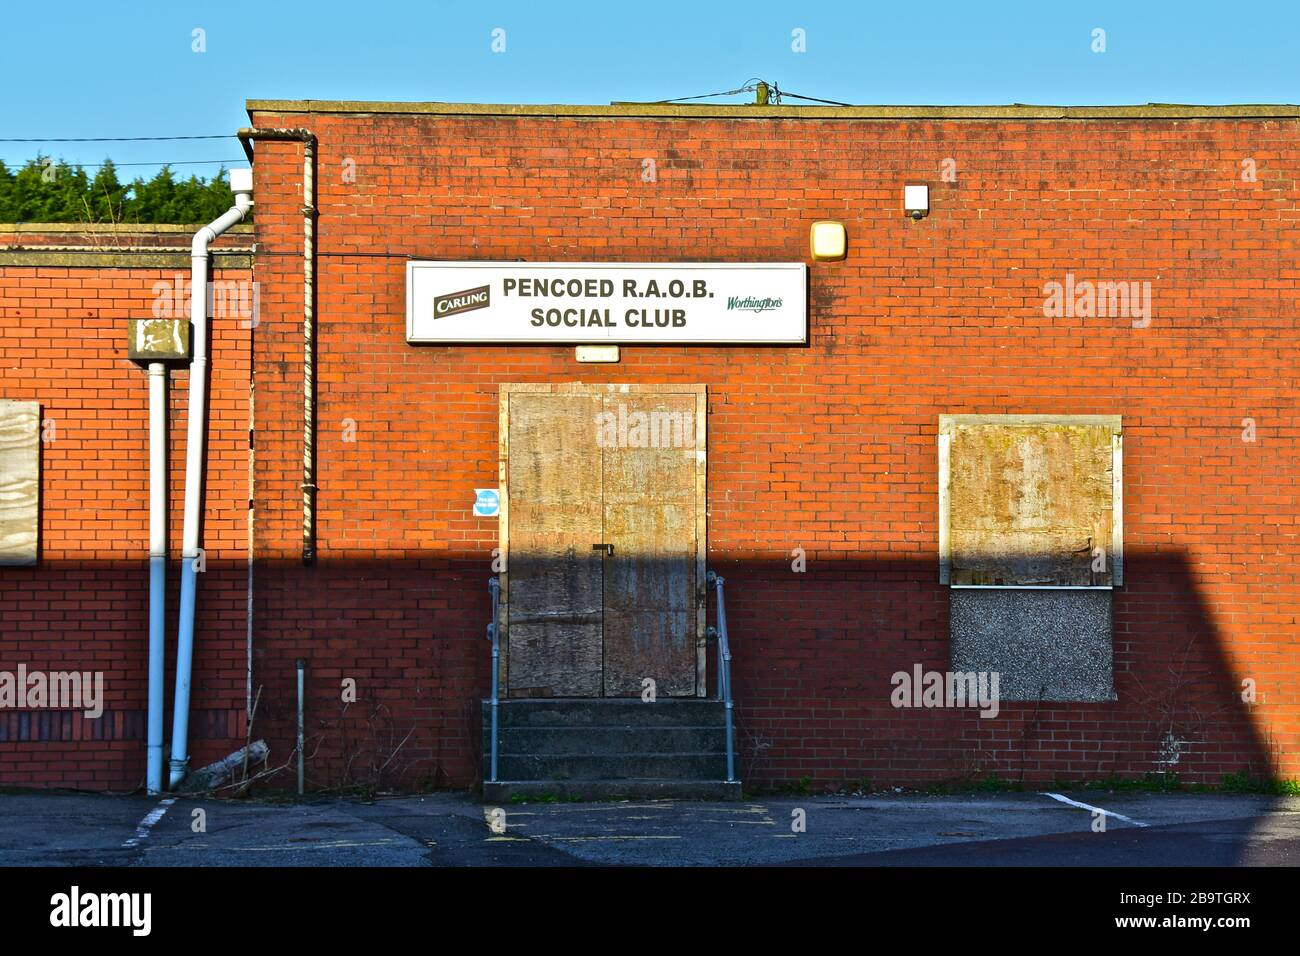 The boarded-up former RAOB Club (Royal Antediluvian Order of Buffaloes, or 'Buffs') is now closed and awaiting demolition,possibly to provide housing. Stock Photo